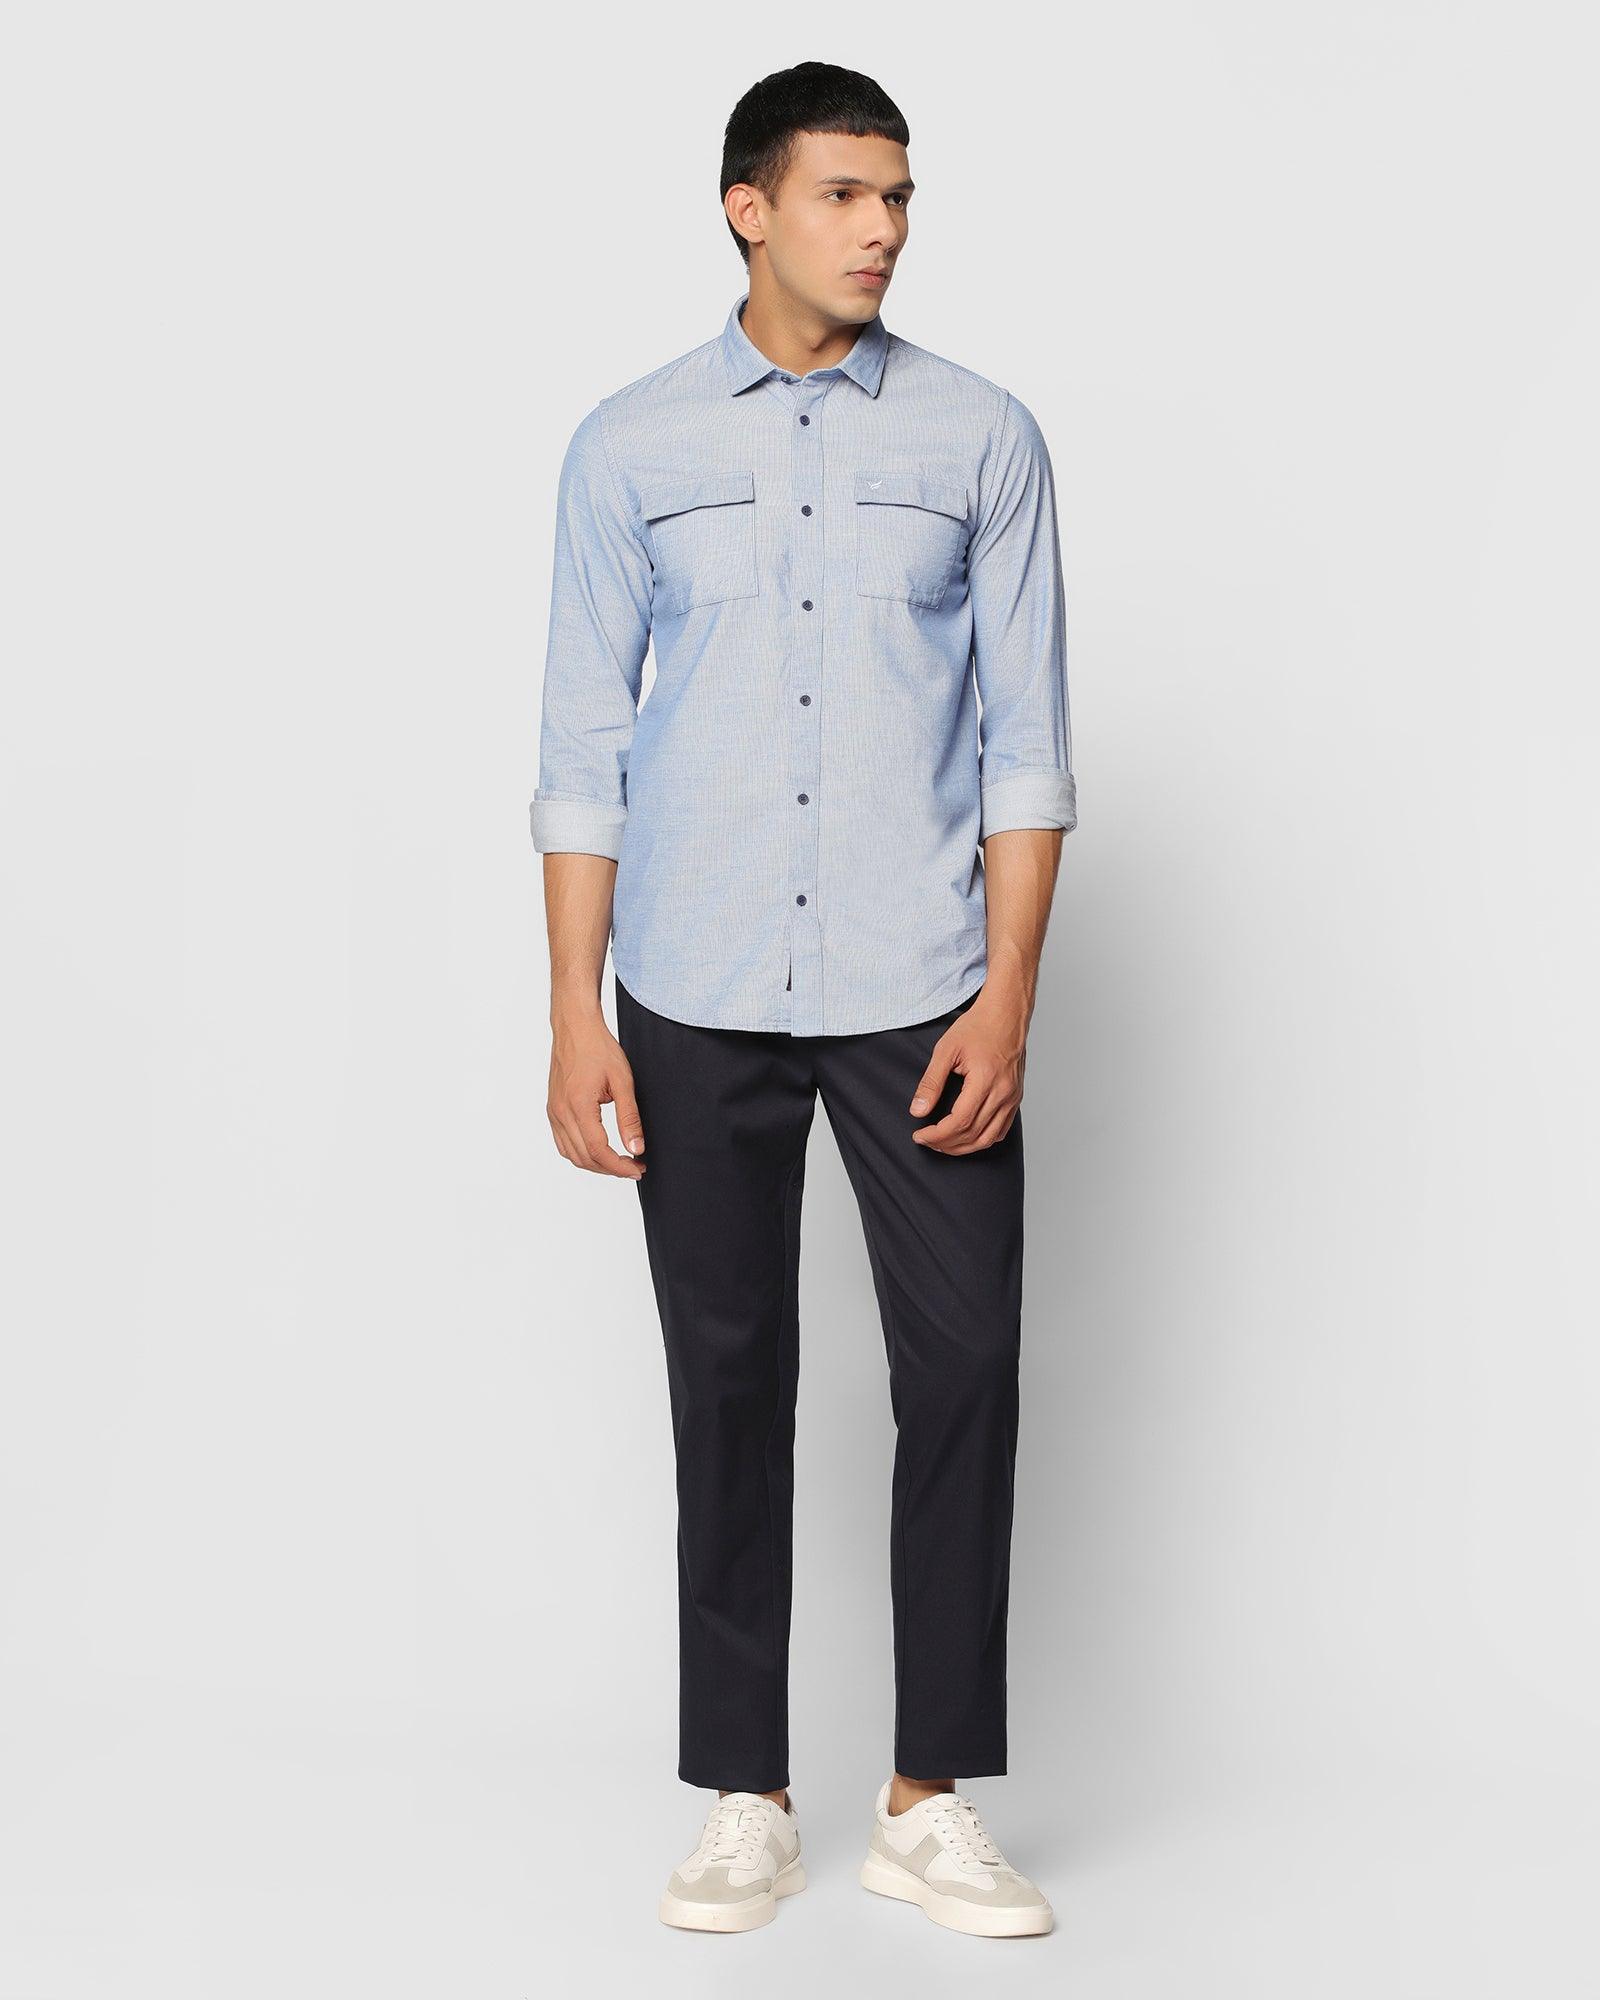 Casual Blue Solid Shirt - Ohio